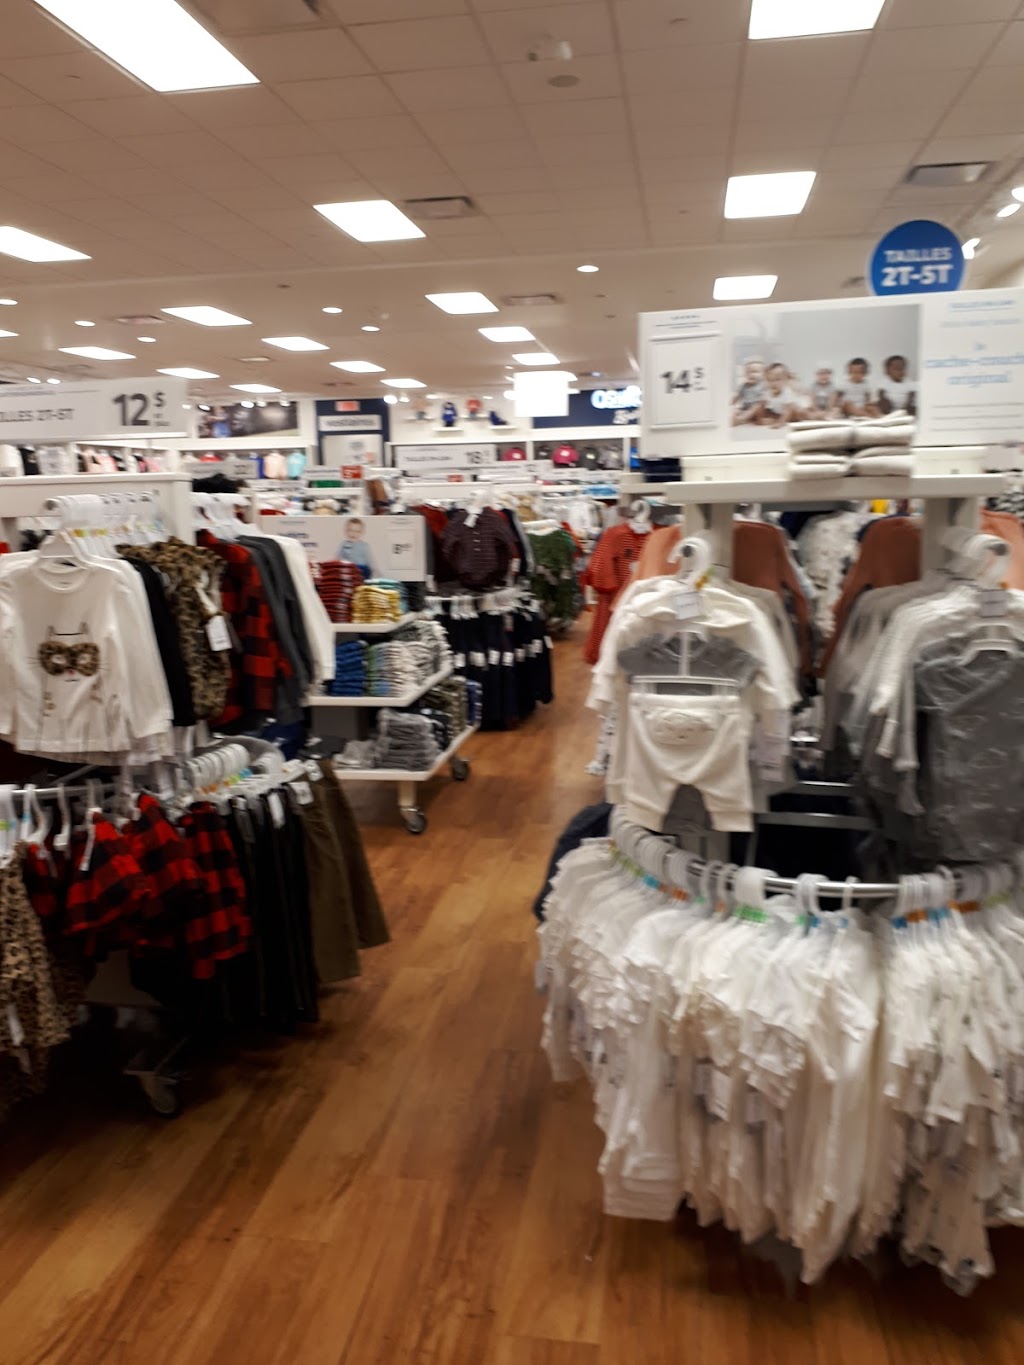 Carters - Curbside Available | clothing store | Carters OshKosh Méga Centre, 200 Rue Bouvier, Lebourgneuf, QC G2J 1R8, Canada | 4186249979 OR +1 418-624-9979